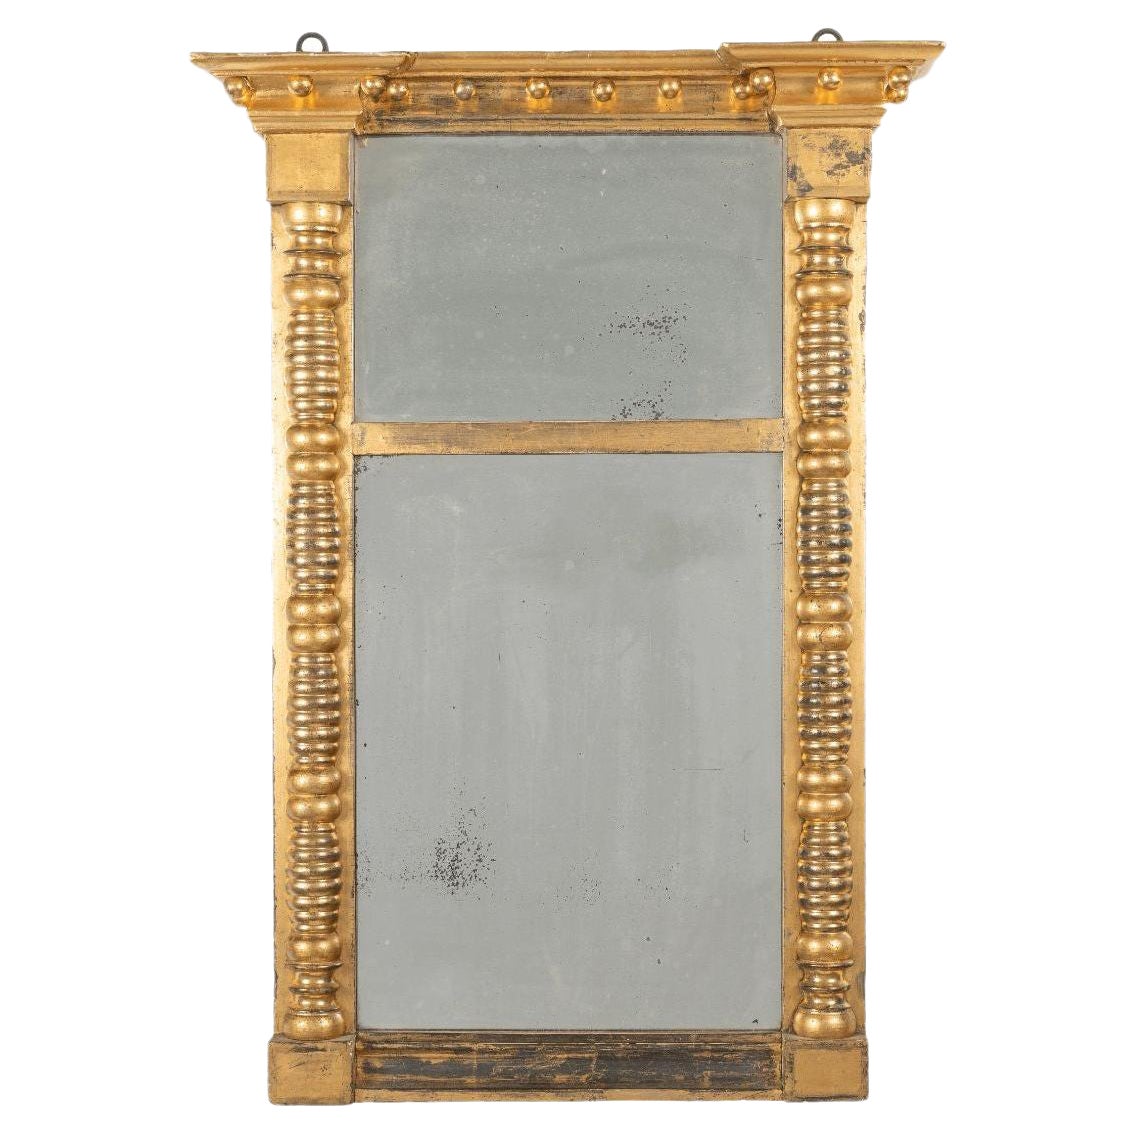 Early 19th Century American New England Gilt Tabernacle Pier Mirror